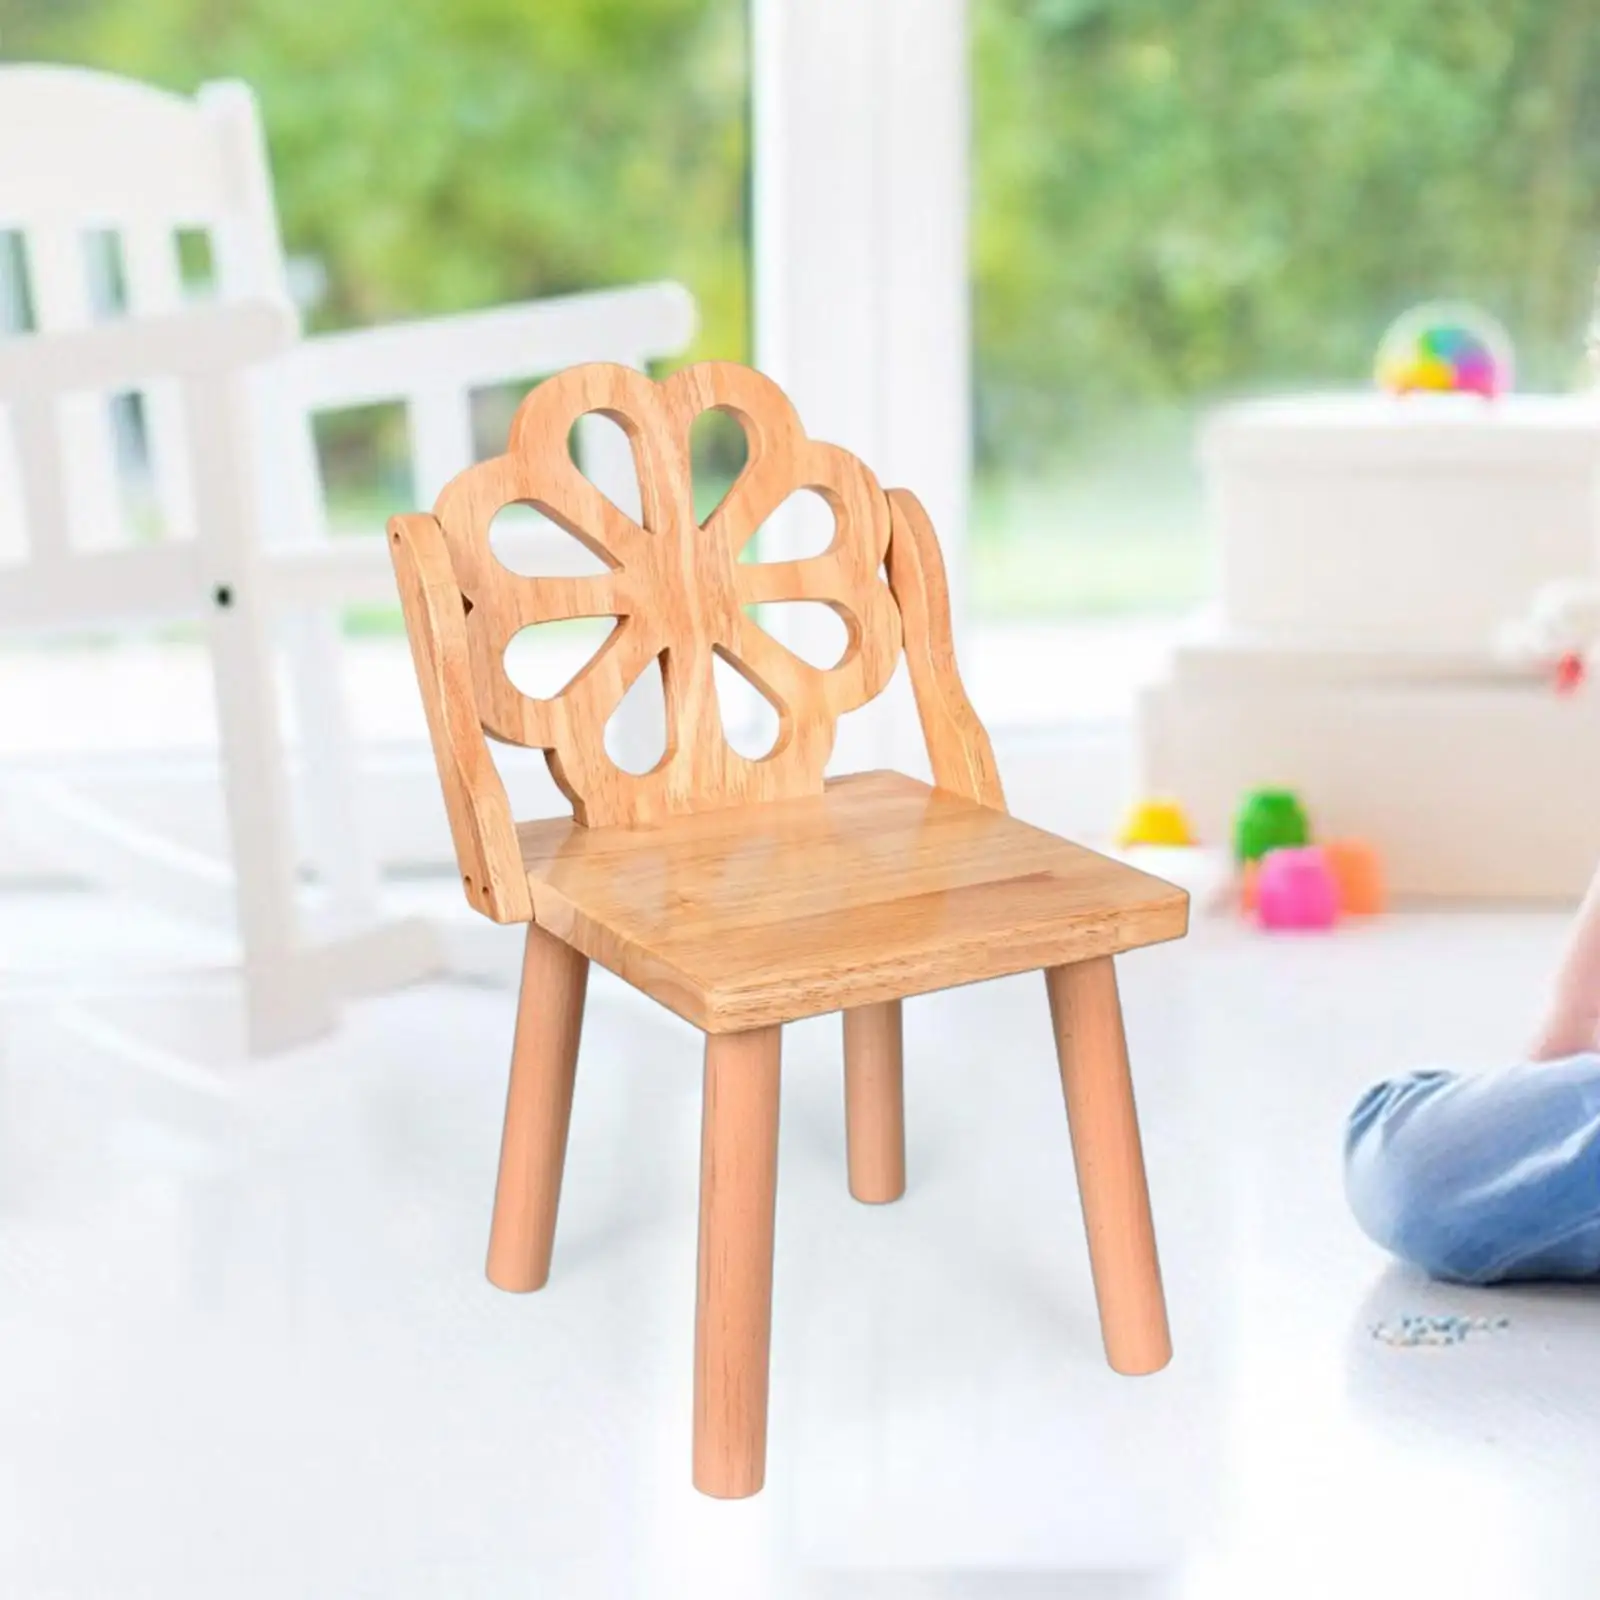 Lightweight Removable Wooden Child Stool Wood High Chair Anti Saving Durable Protable Wood Small Seat Stool for Kids